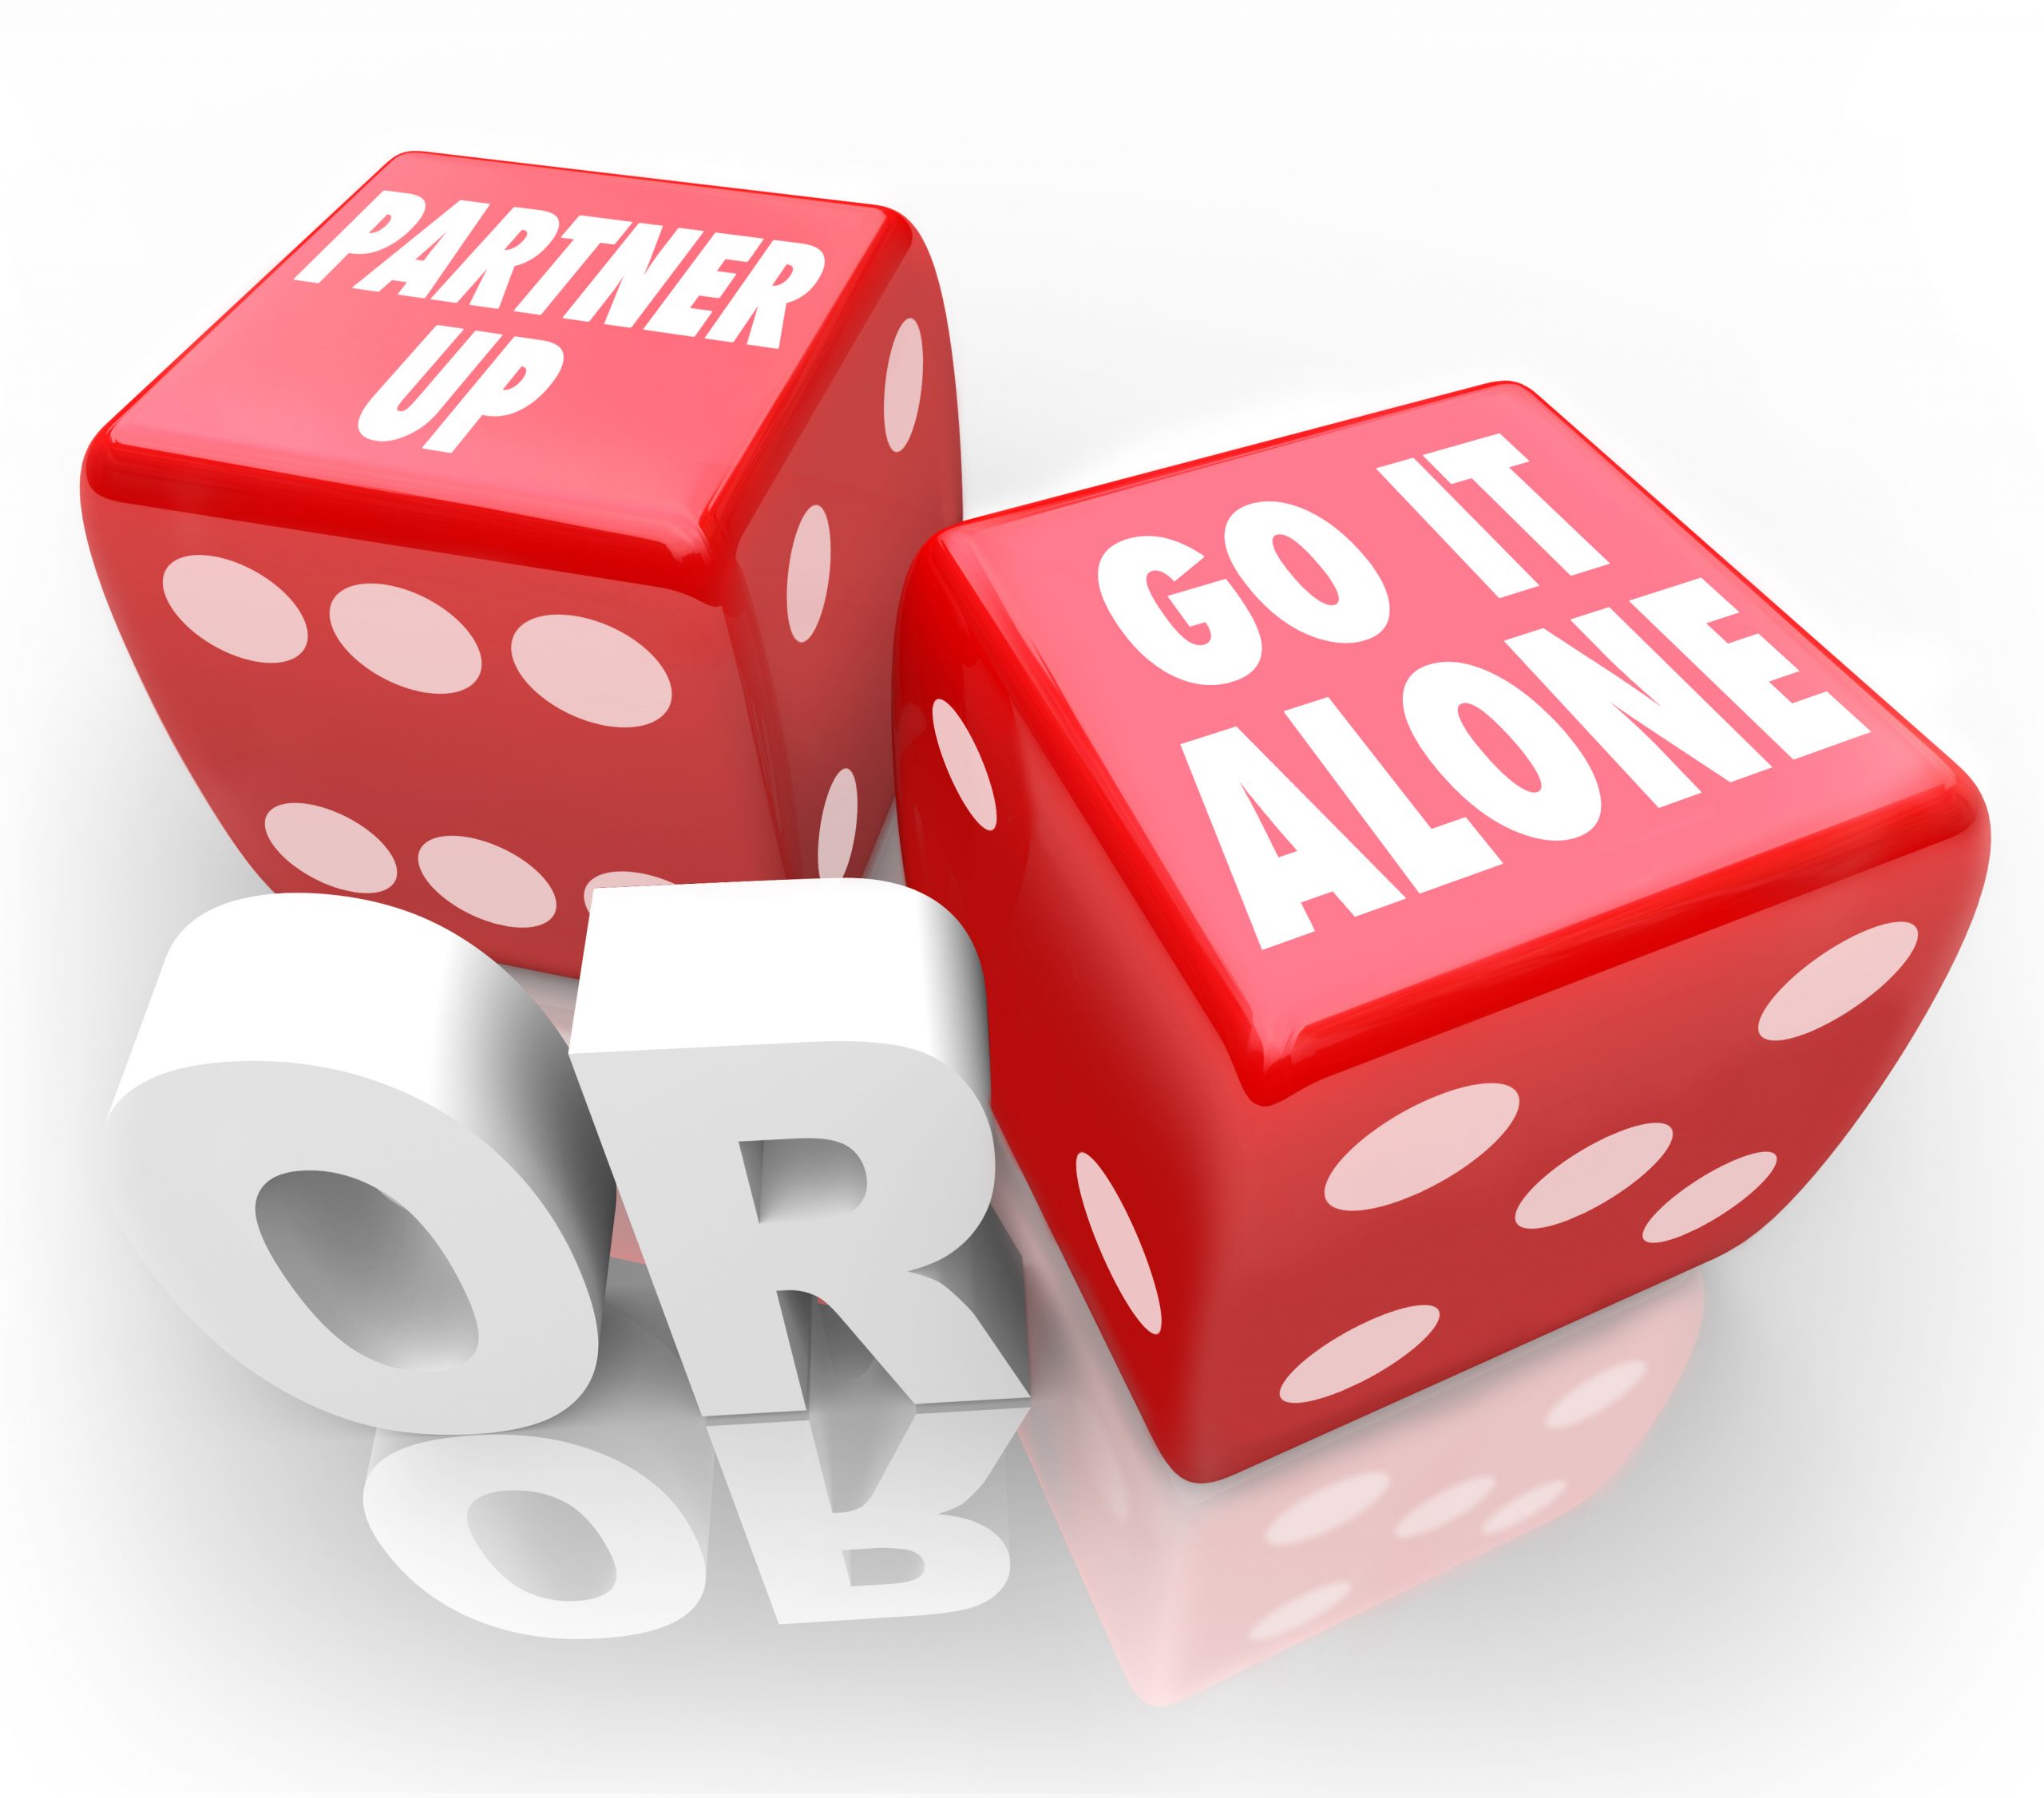 pair of dice that say "partner up" or "go it alone" to represent a solo real estate agent or a team agent